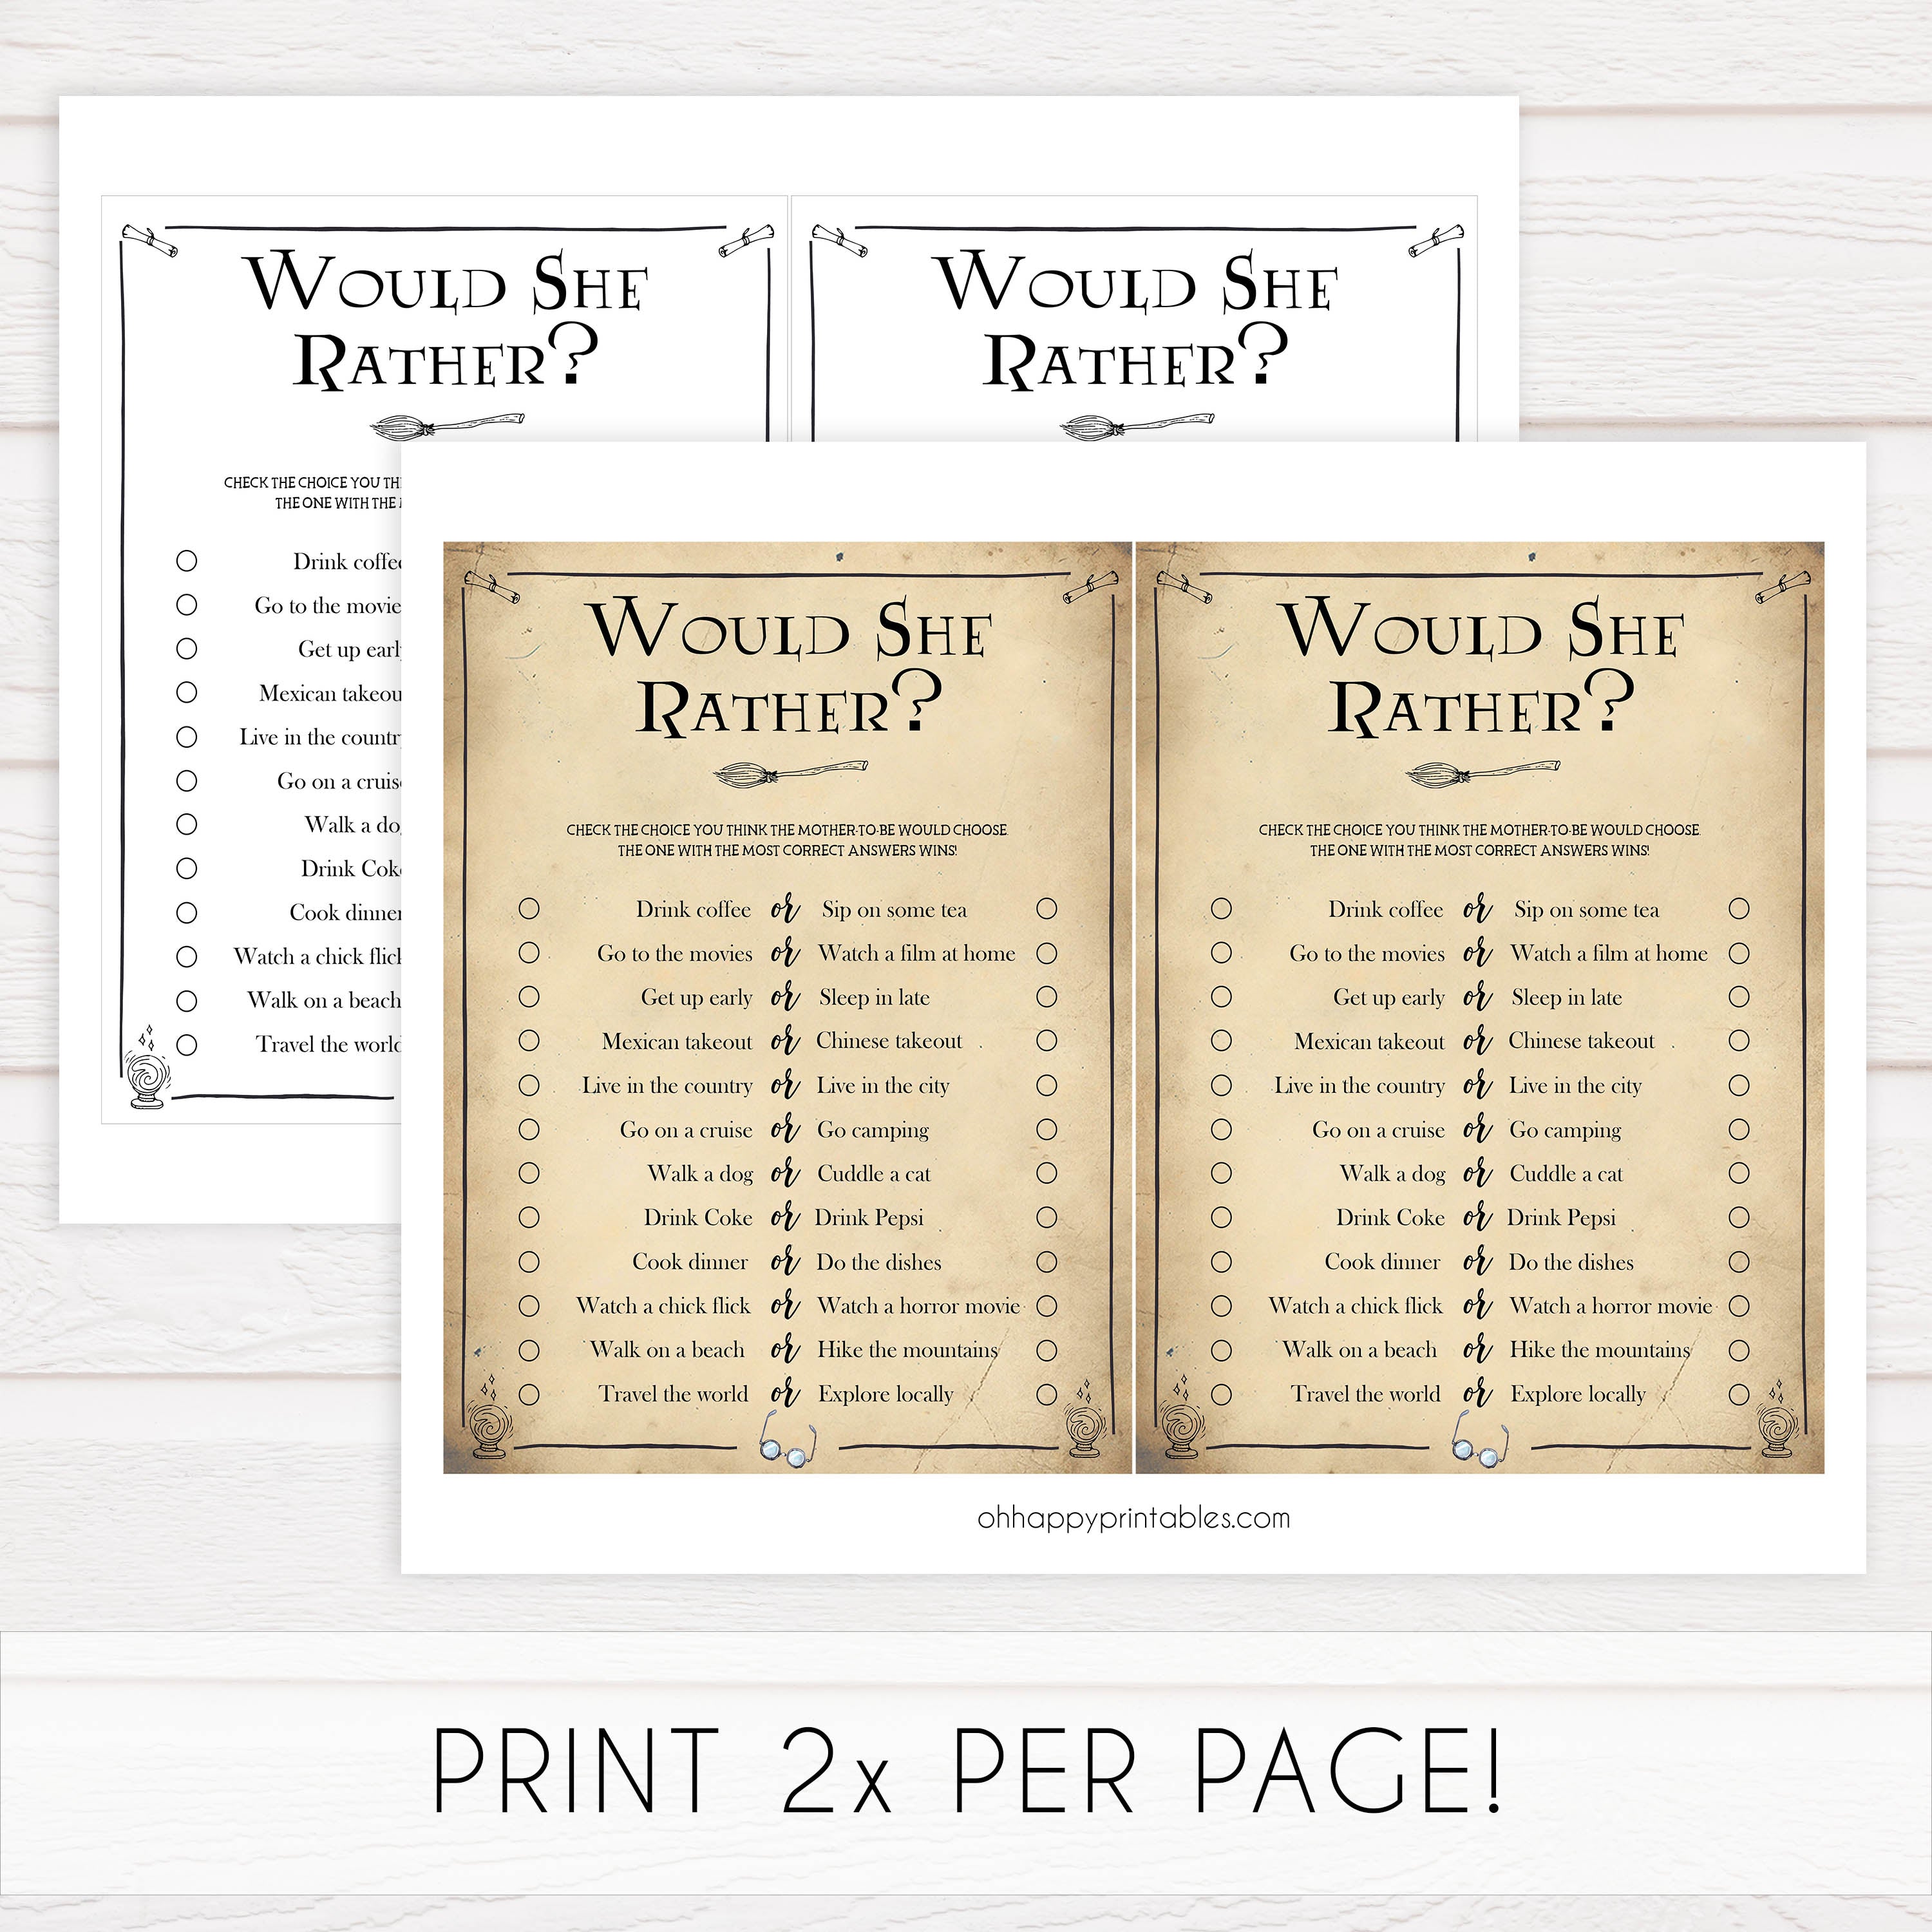 Would She Rather Baby Games, Wizard baby shower games, printable baby shower games, Harry Potter baby games, Harry Potter baby shower, fun baby shower games,  fun baby ideas